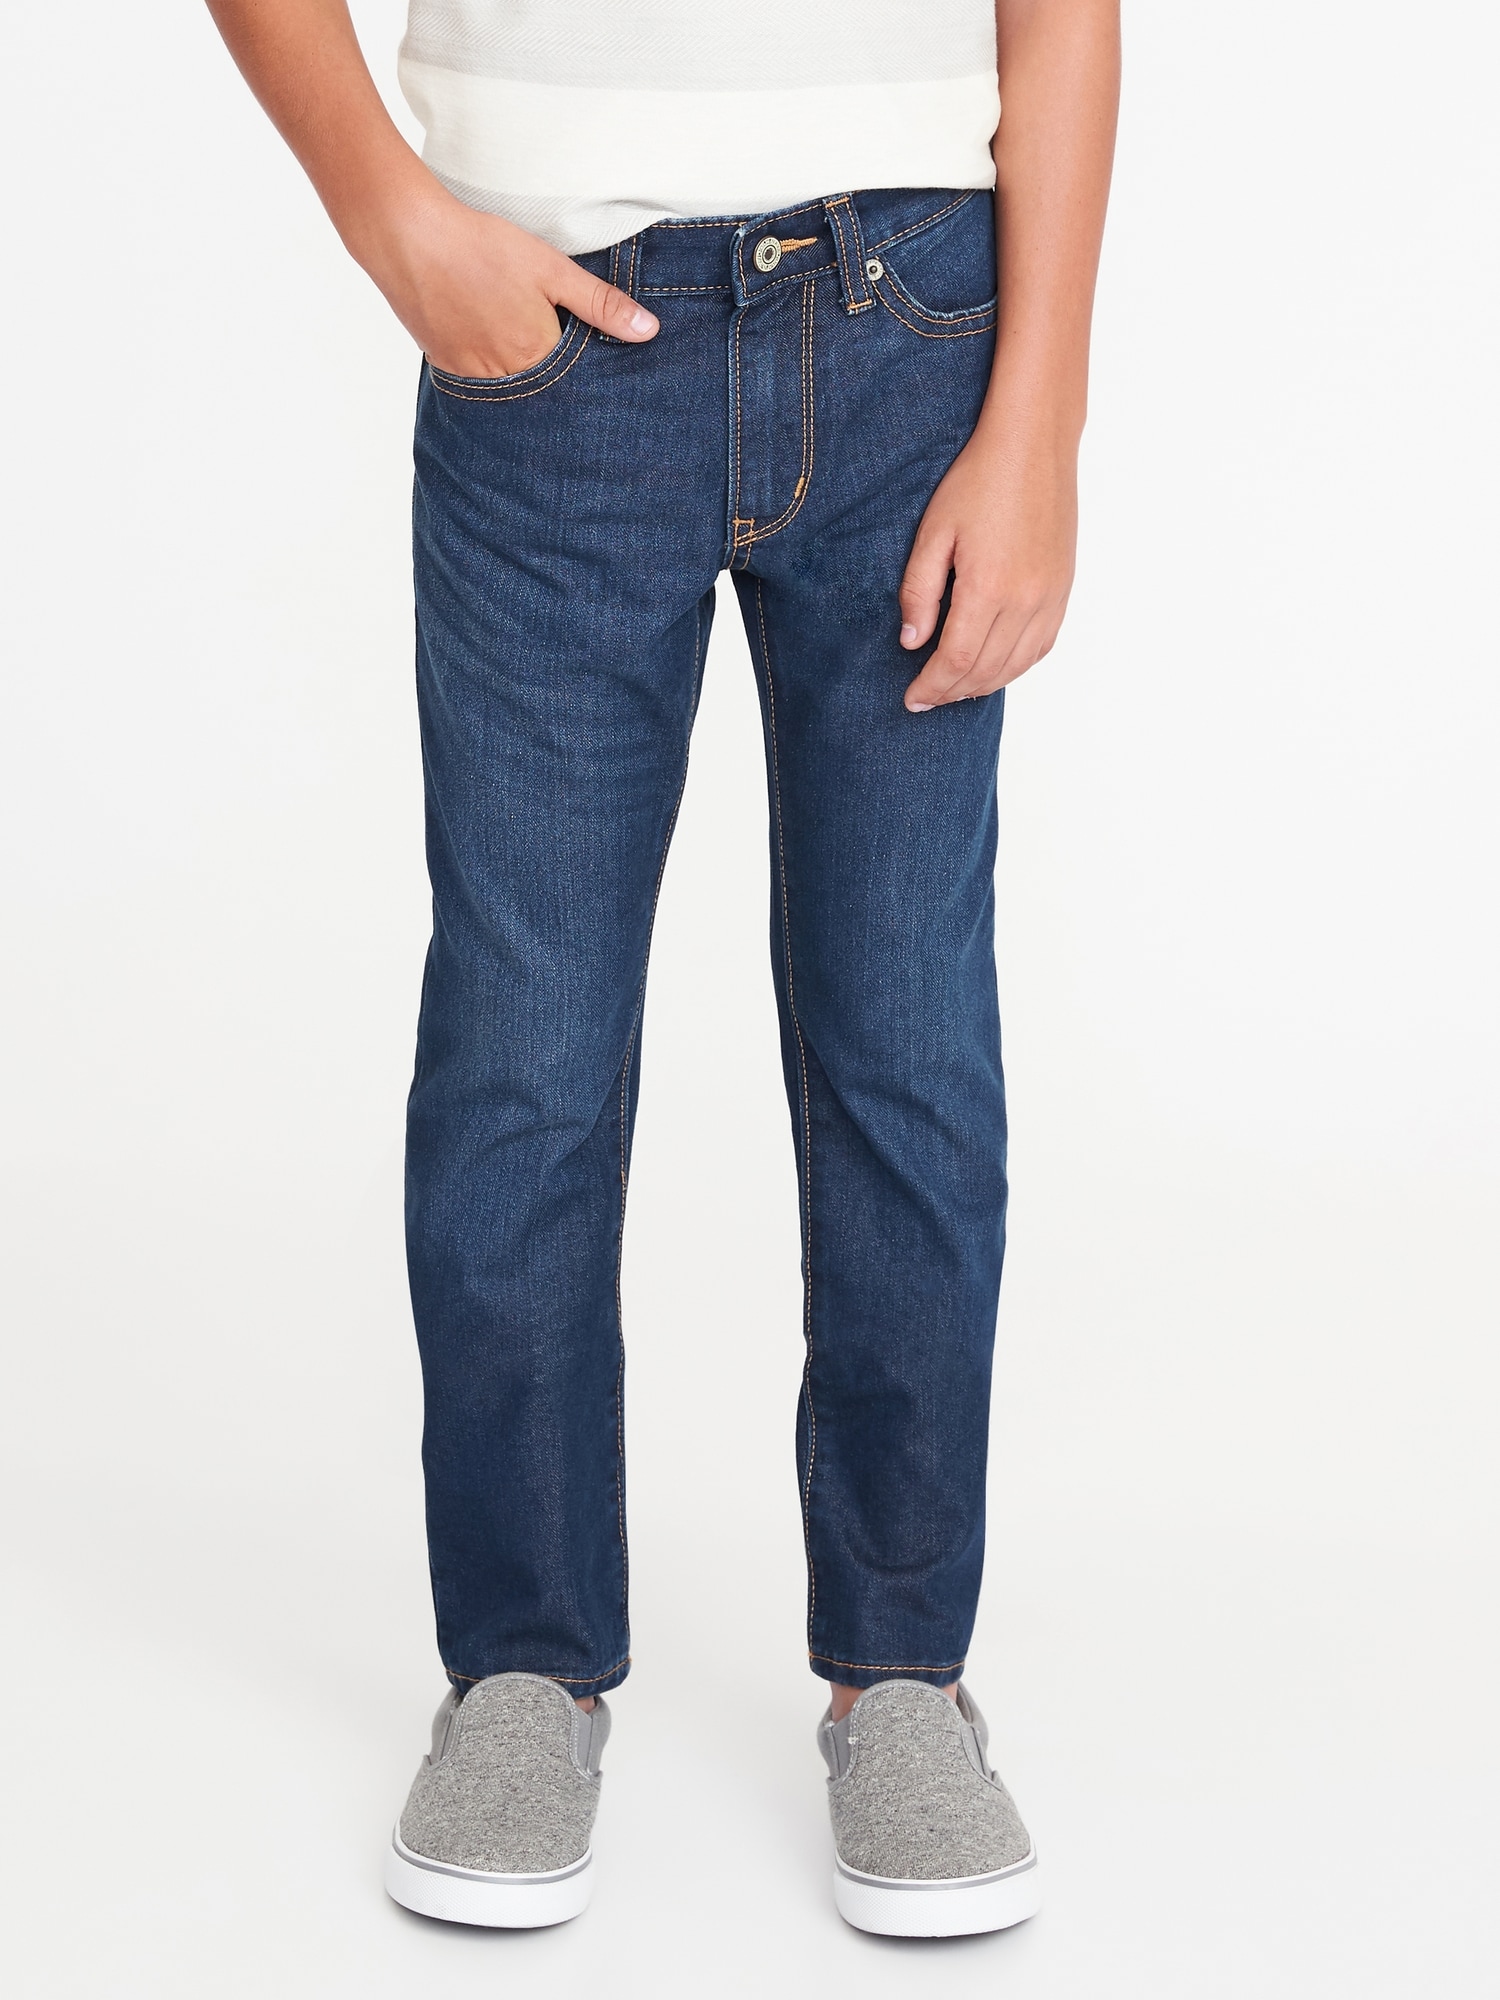 Wow Skinny Non-Stretch Jeans for Boys | Old Navy